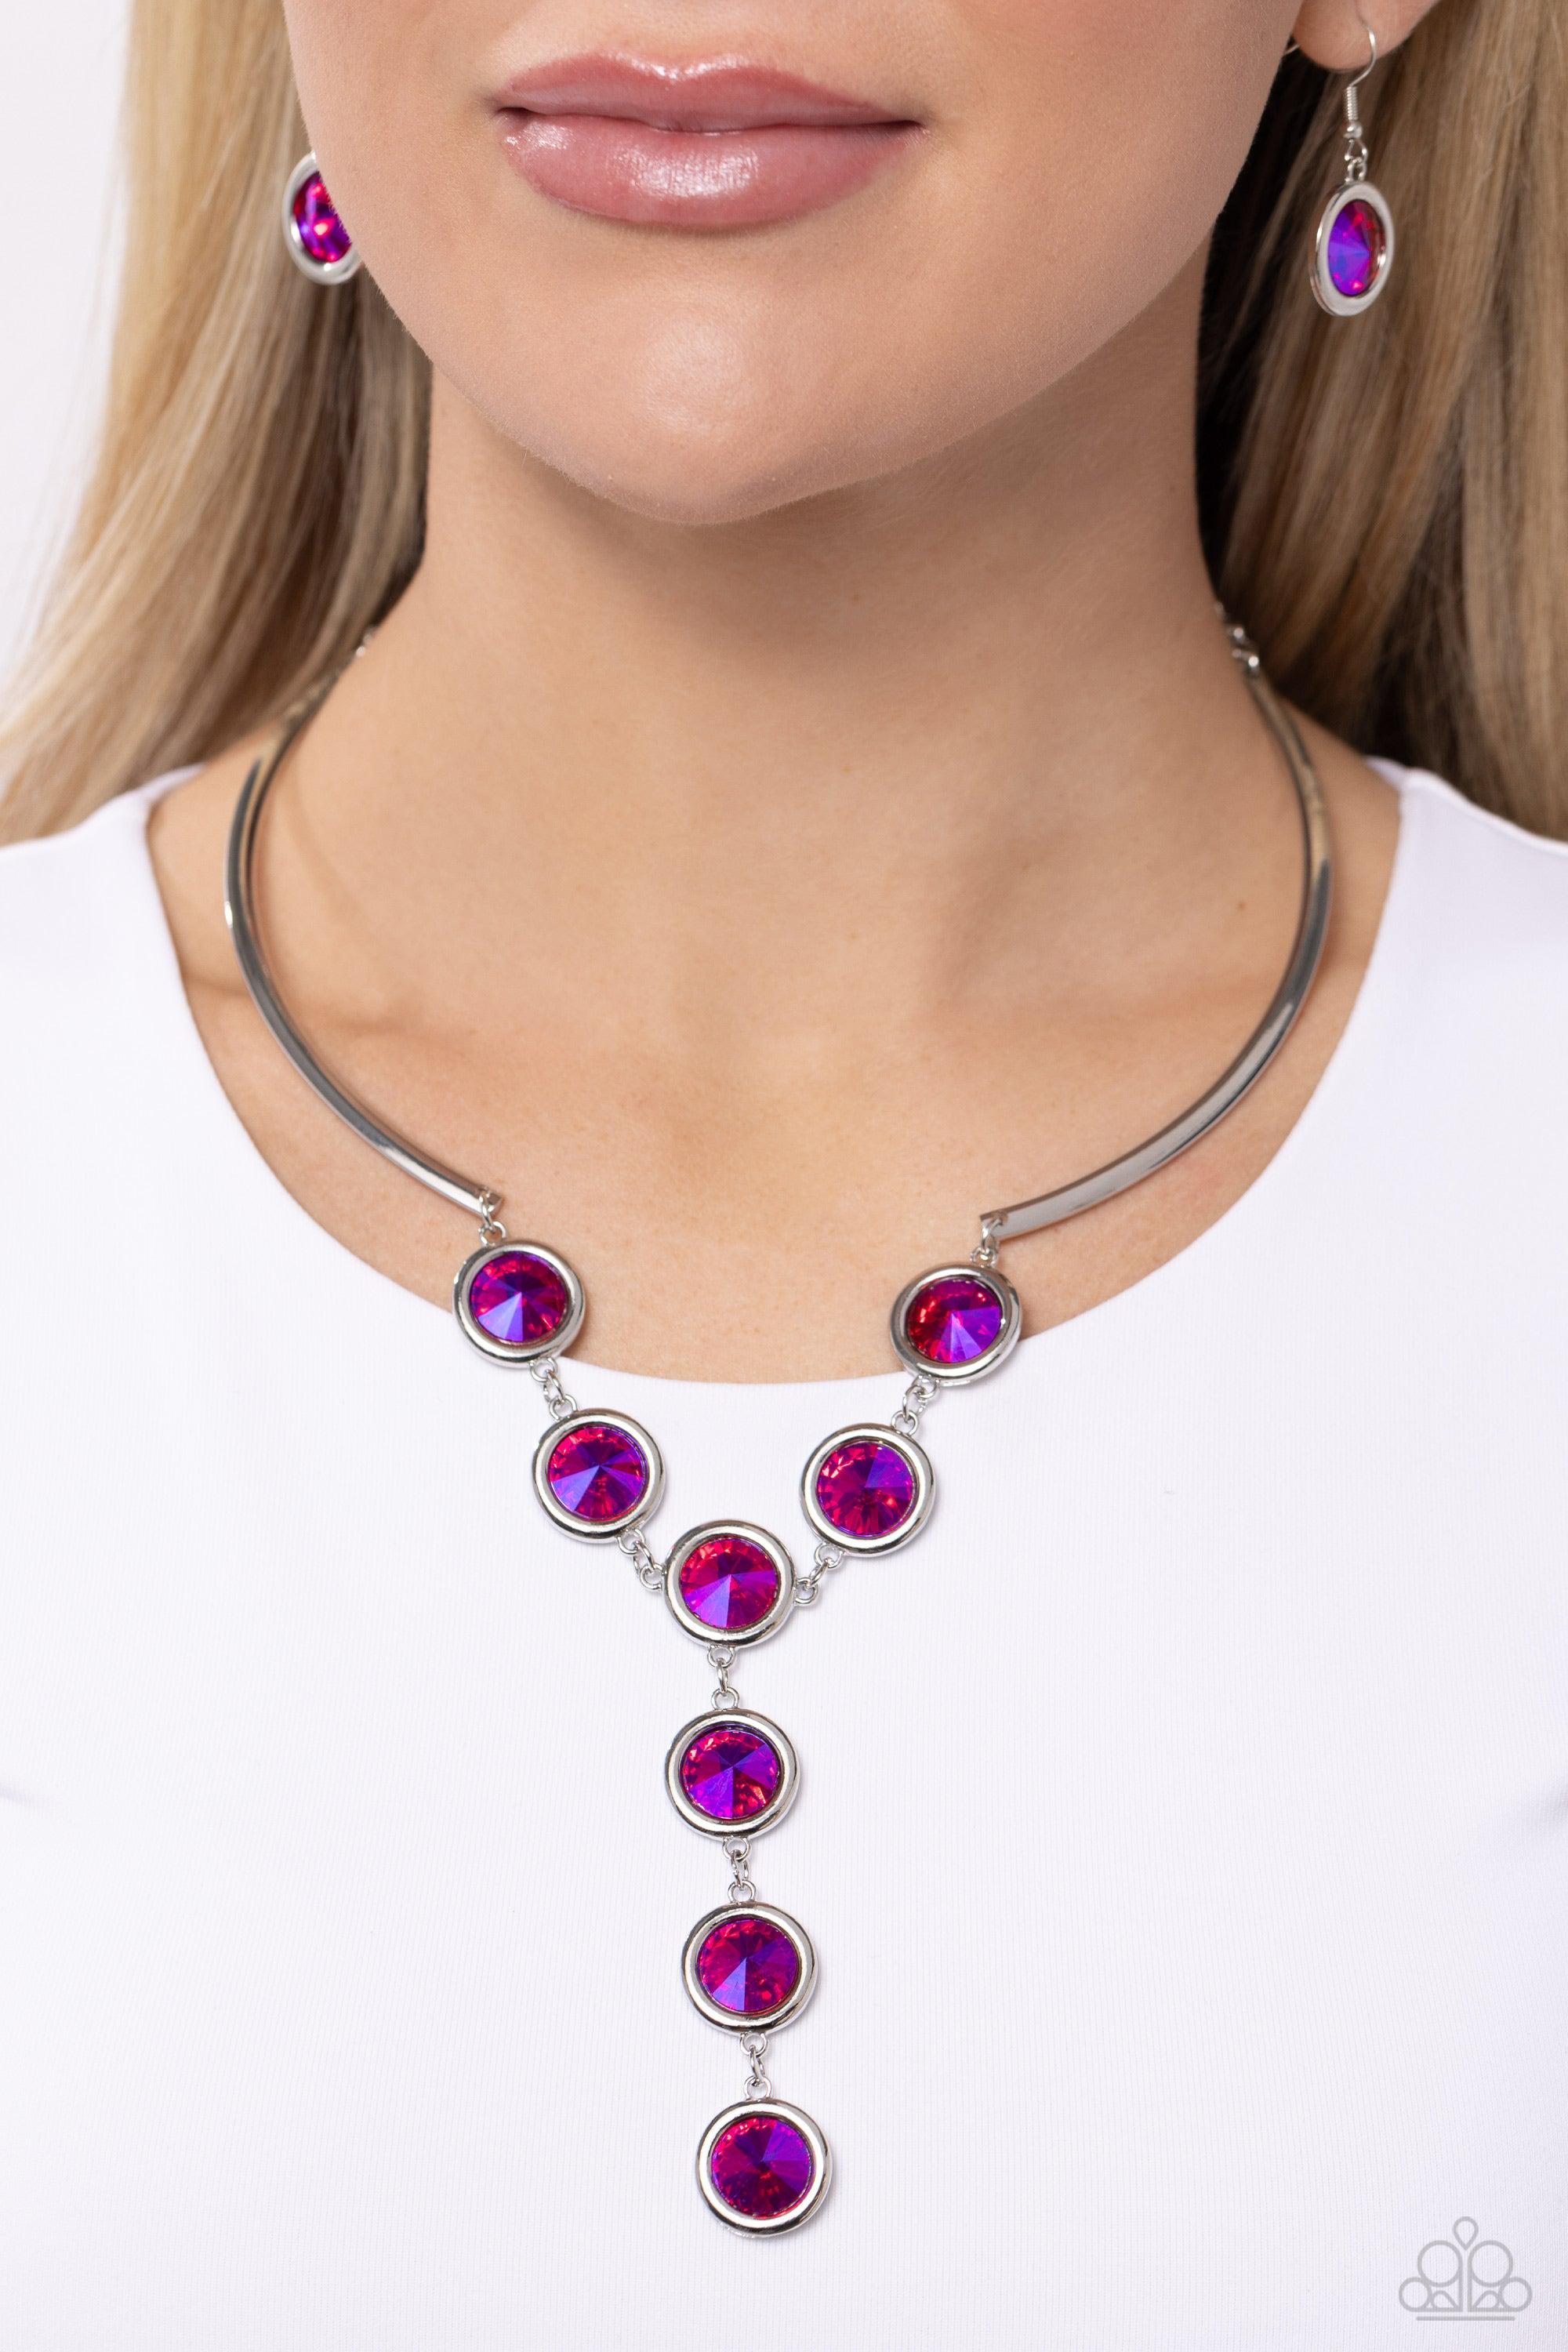 Cheers to Confidence Pink UV Shimmer Rhinestone Necklace - Paparazzi Accessories- lightbox - CarasShop.com - $5 Jewelry by Cara Jewels